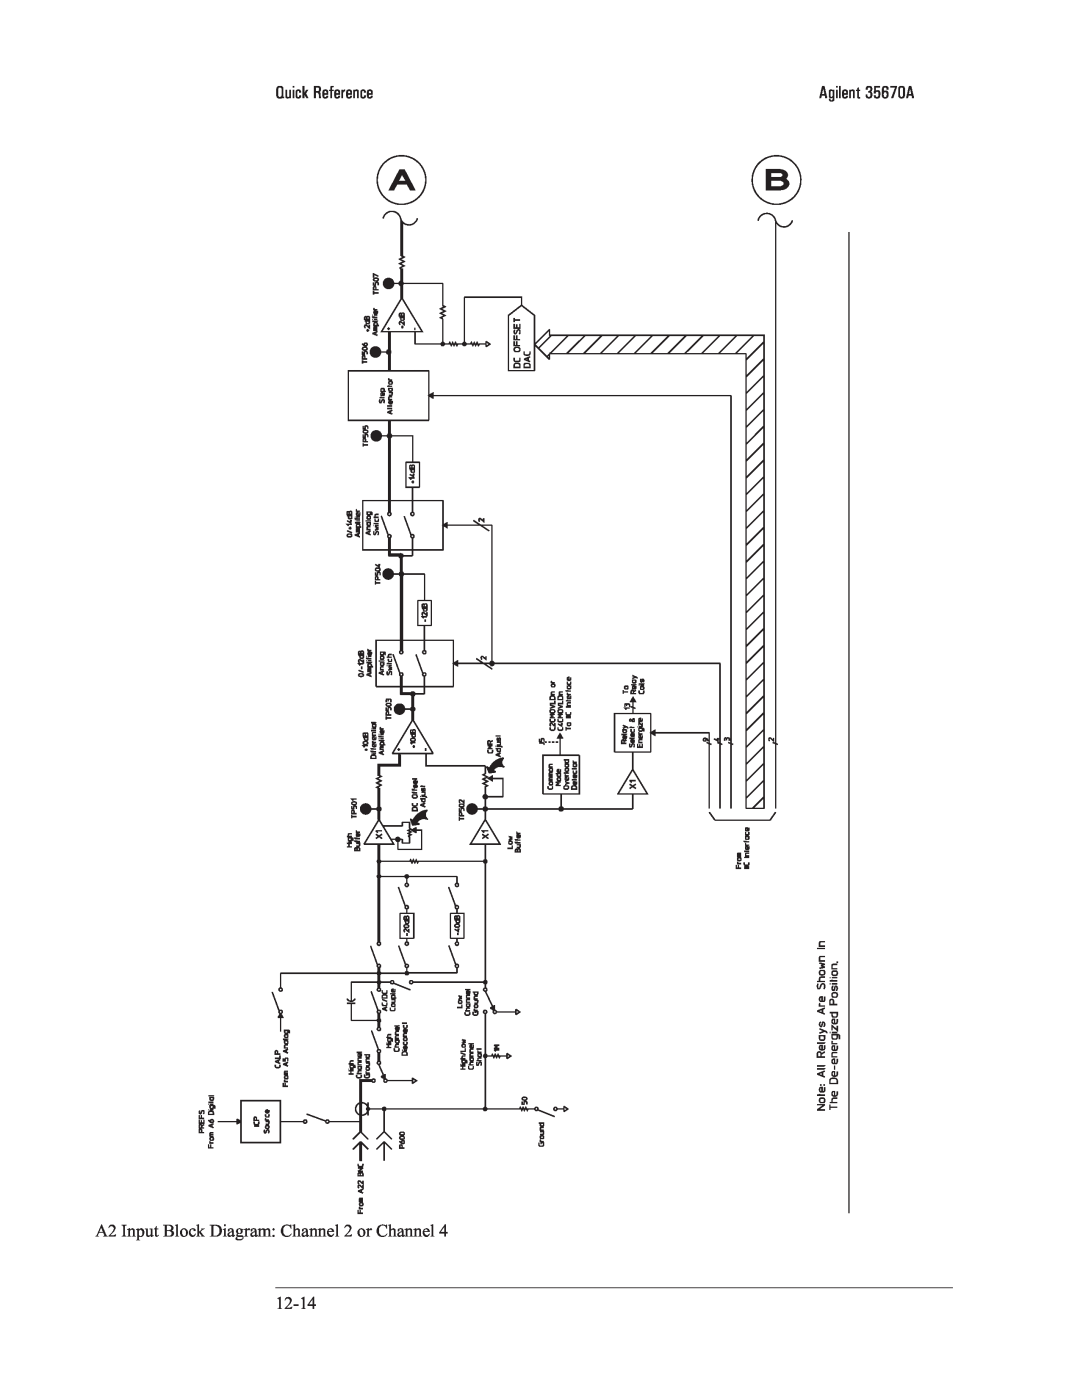 Agilent Technologies 35670-90066 manual A2 Input Block Diagram: Channel 2 or Channel, Quick Reference, Agilent 35670A 